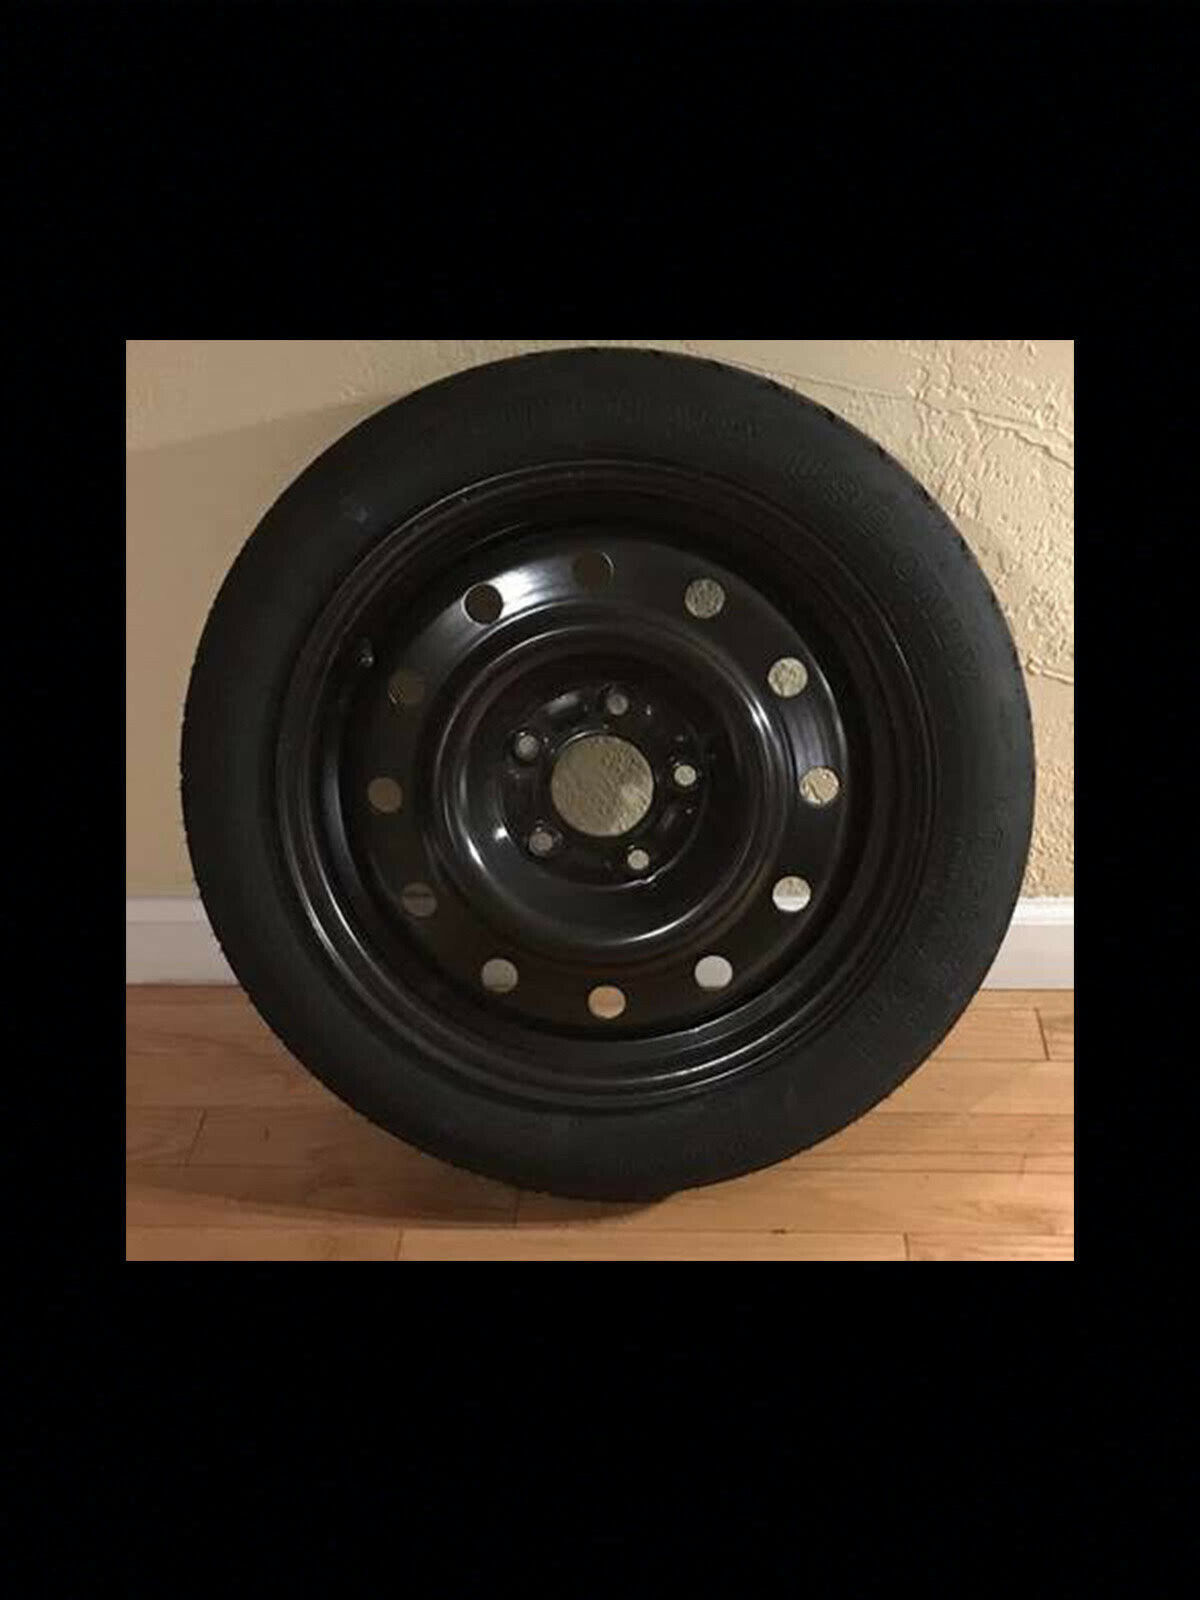 99' Cadillac Deville Spare Tire (Like New; 1 Owner)